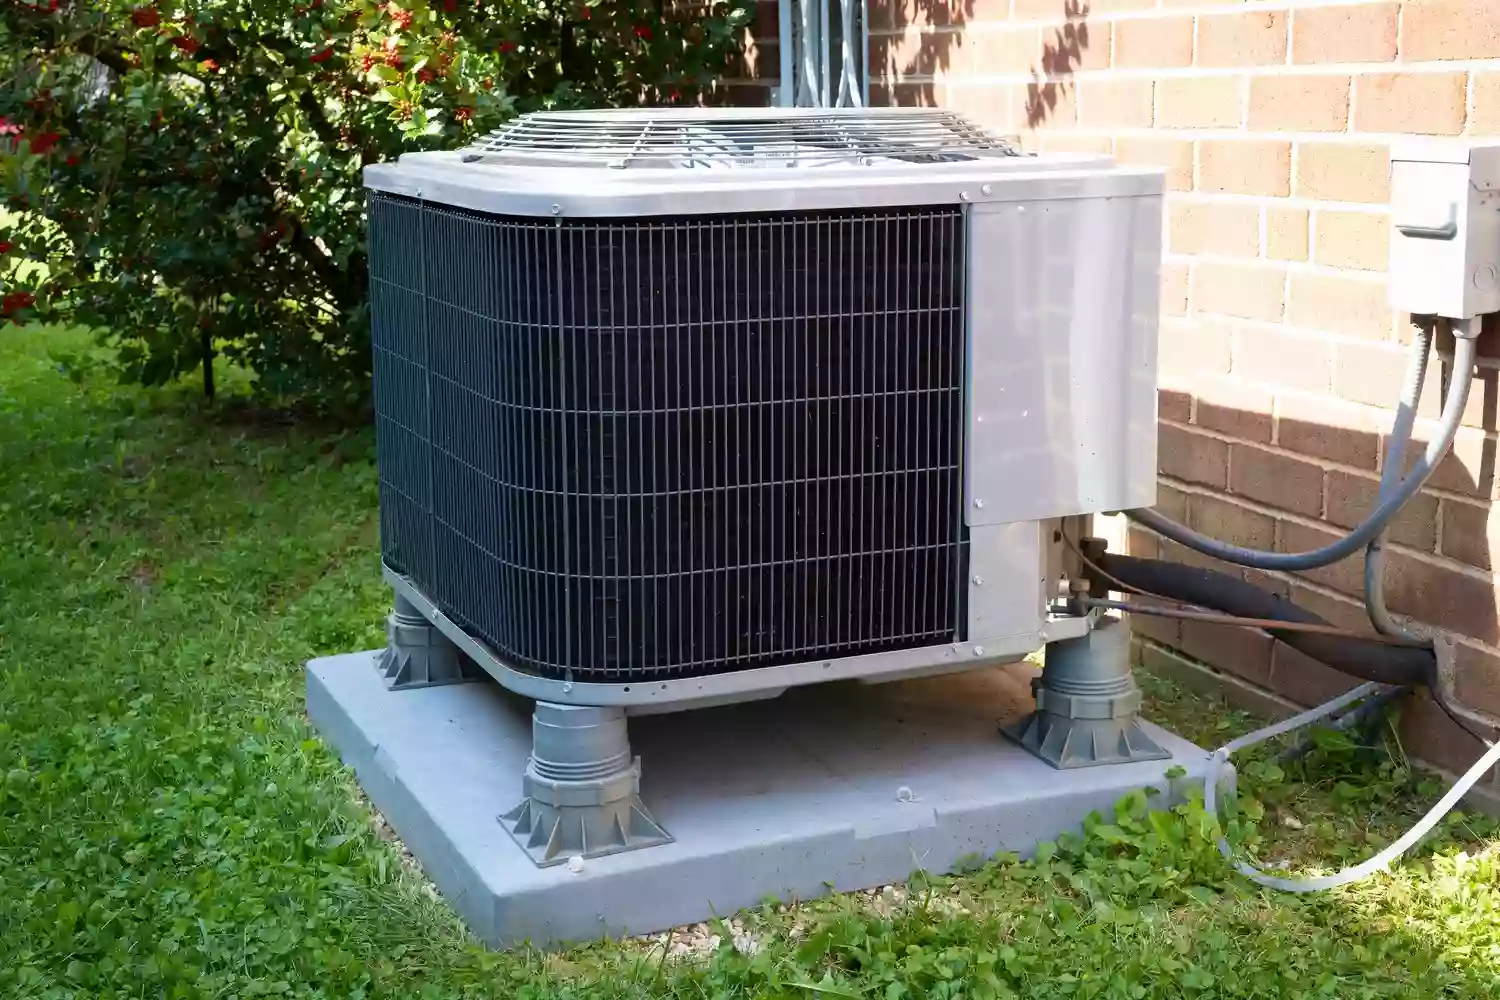 McHenry Air Conditioning Service